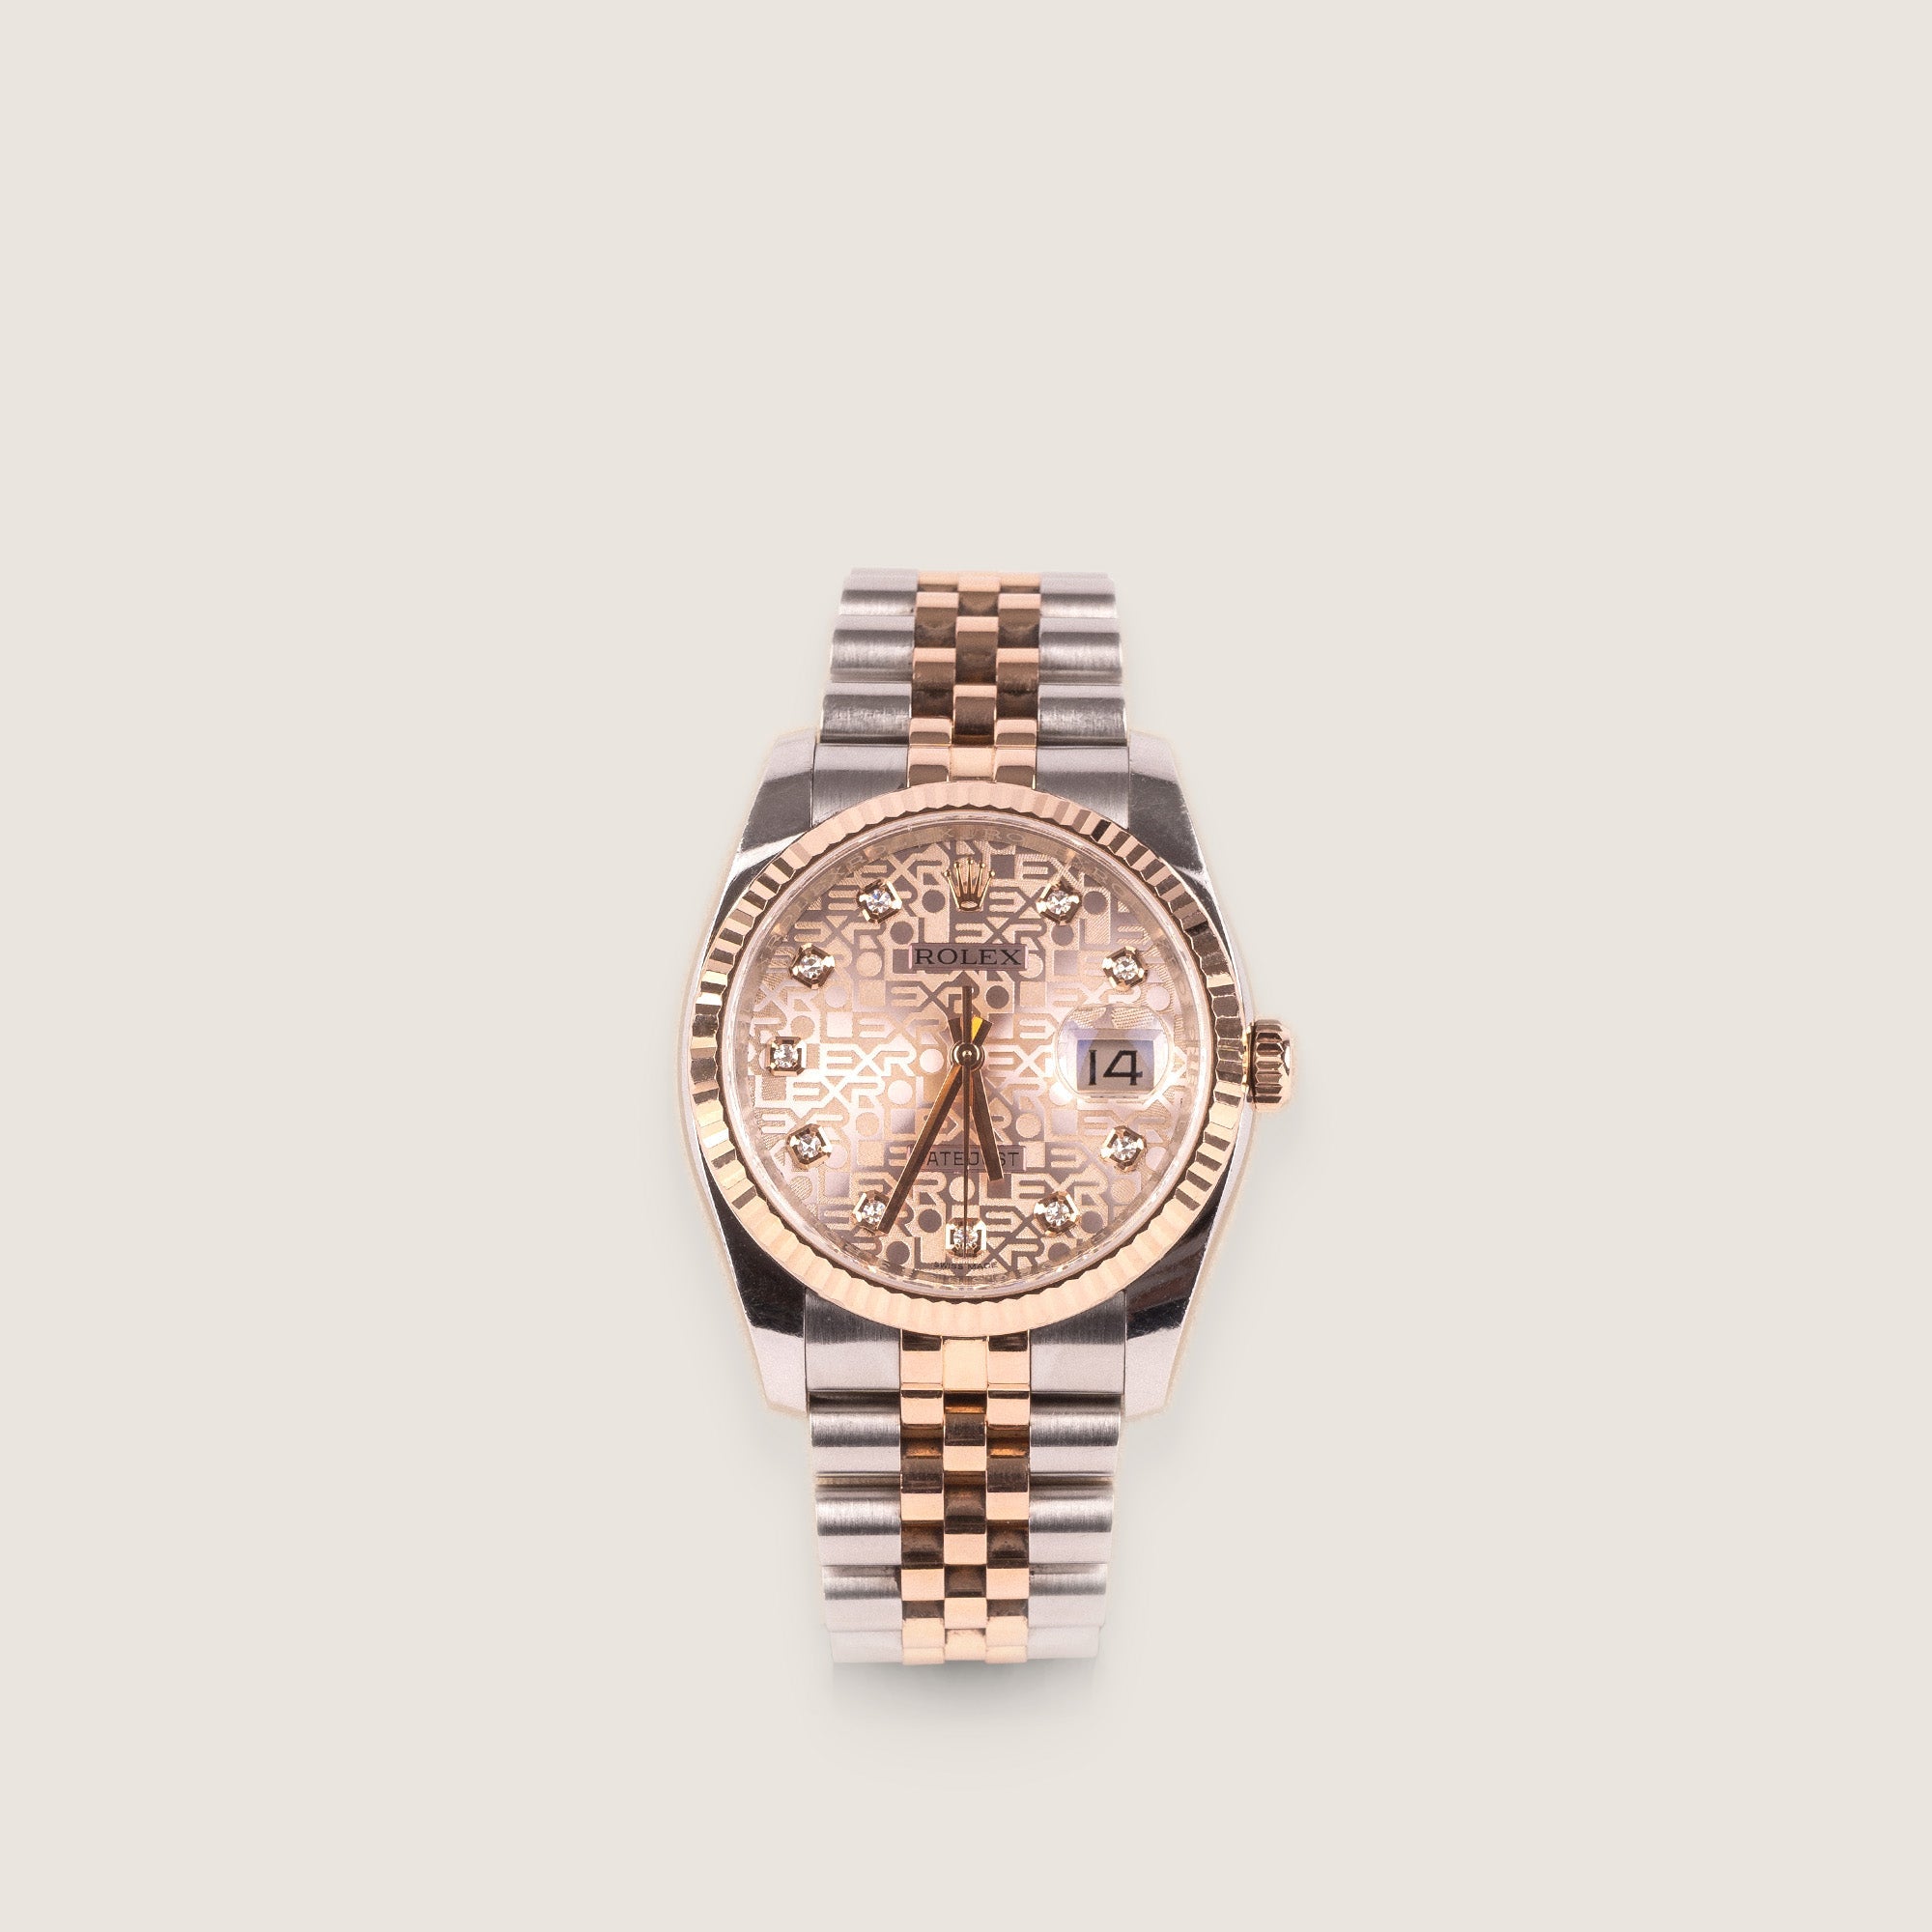 Datejust 36 Rosegold/Steel - ROLEX - Affordable Luxury